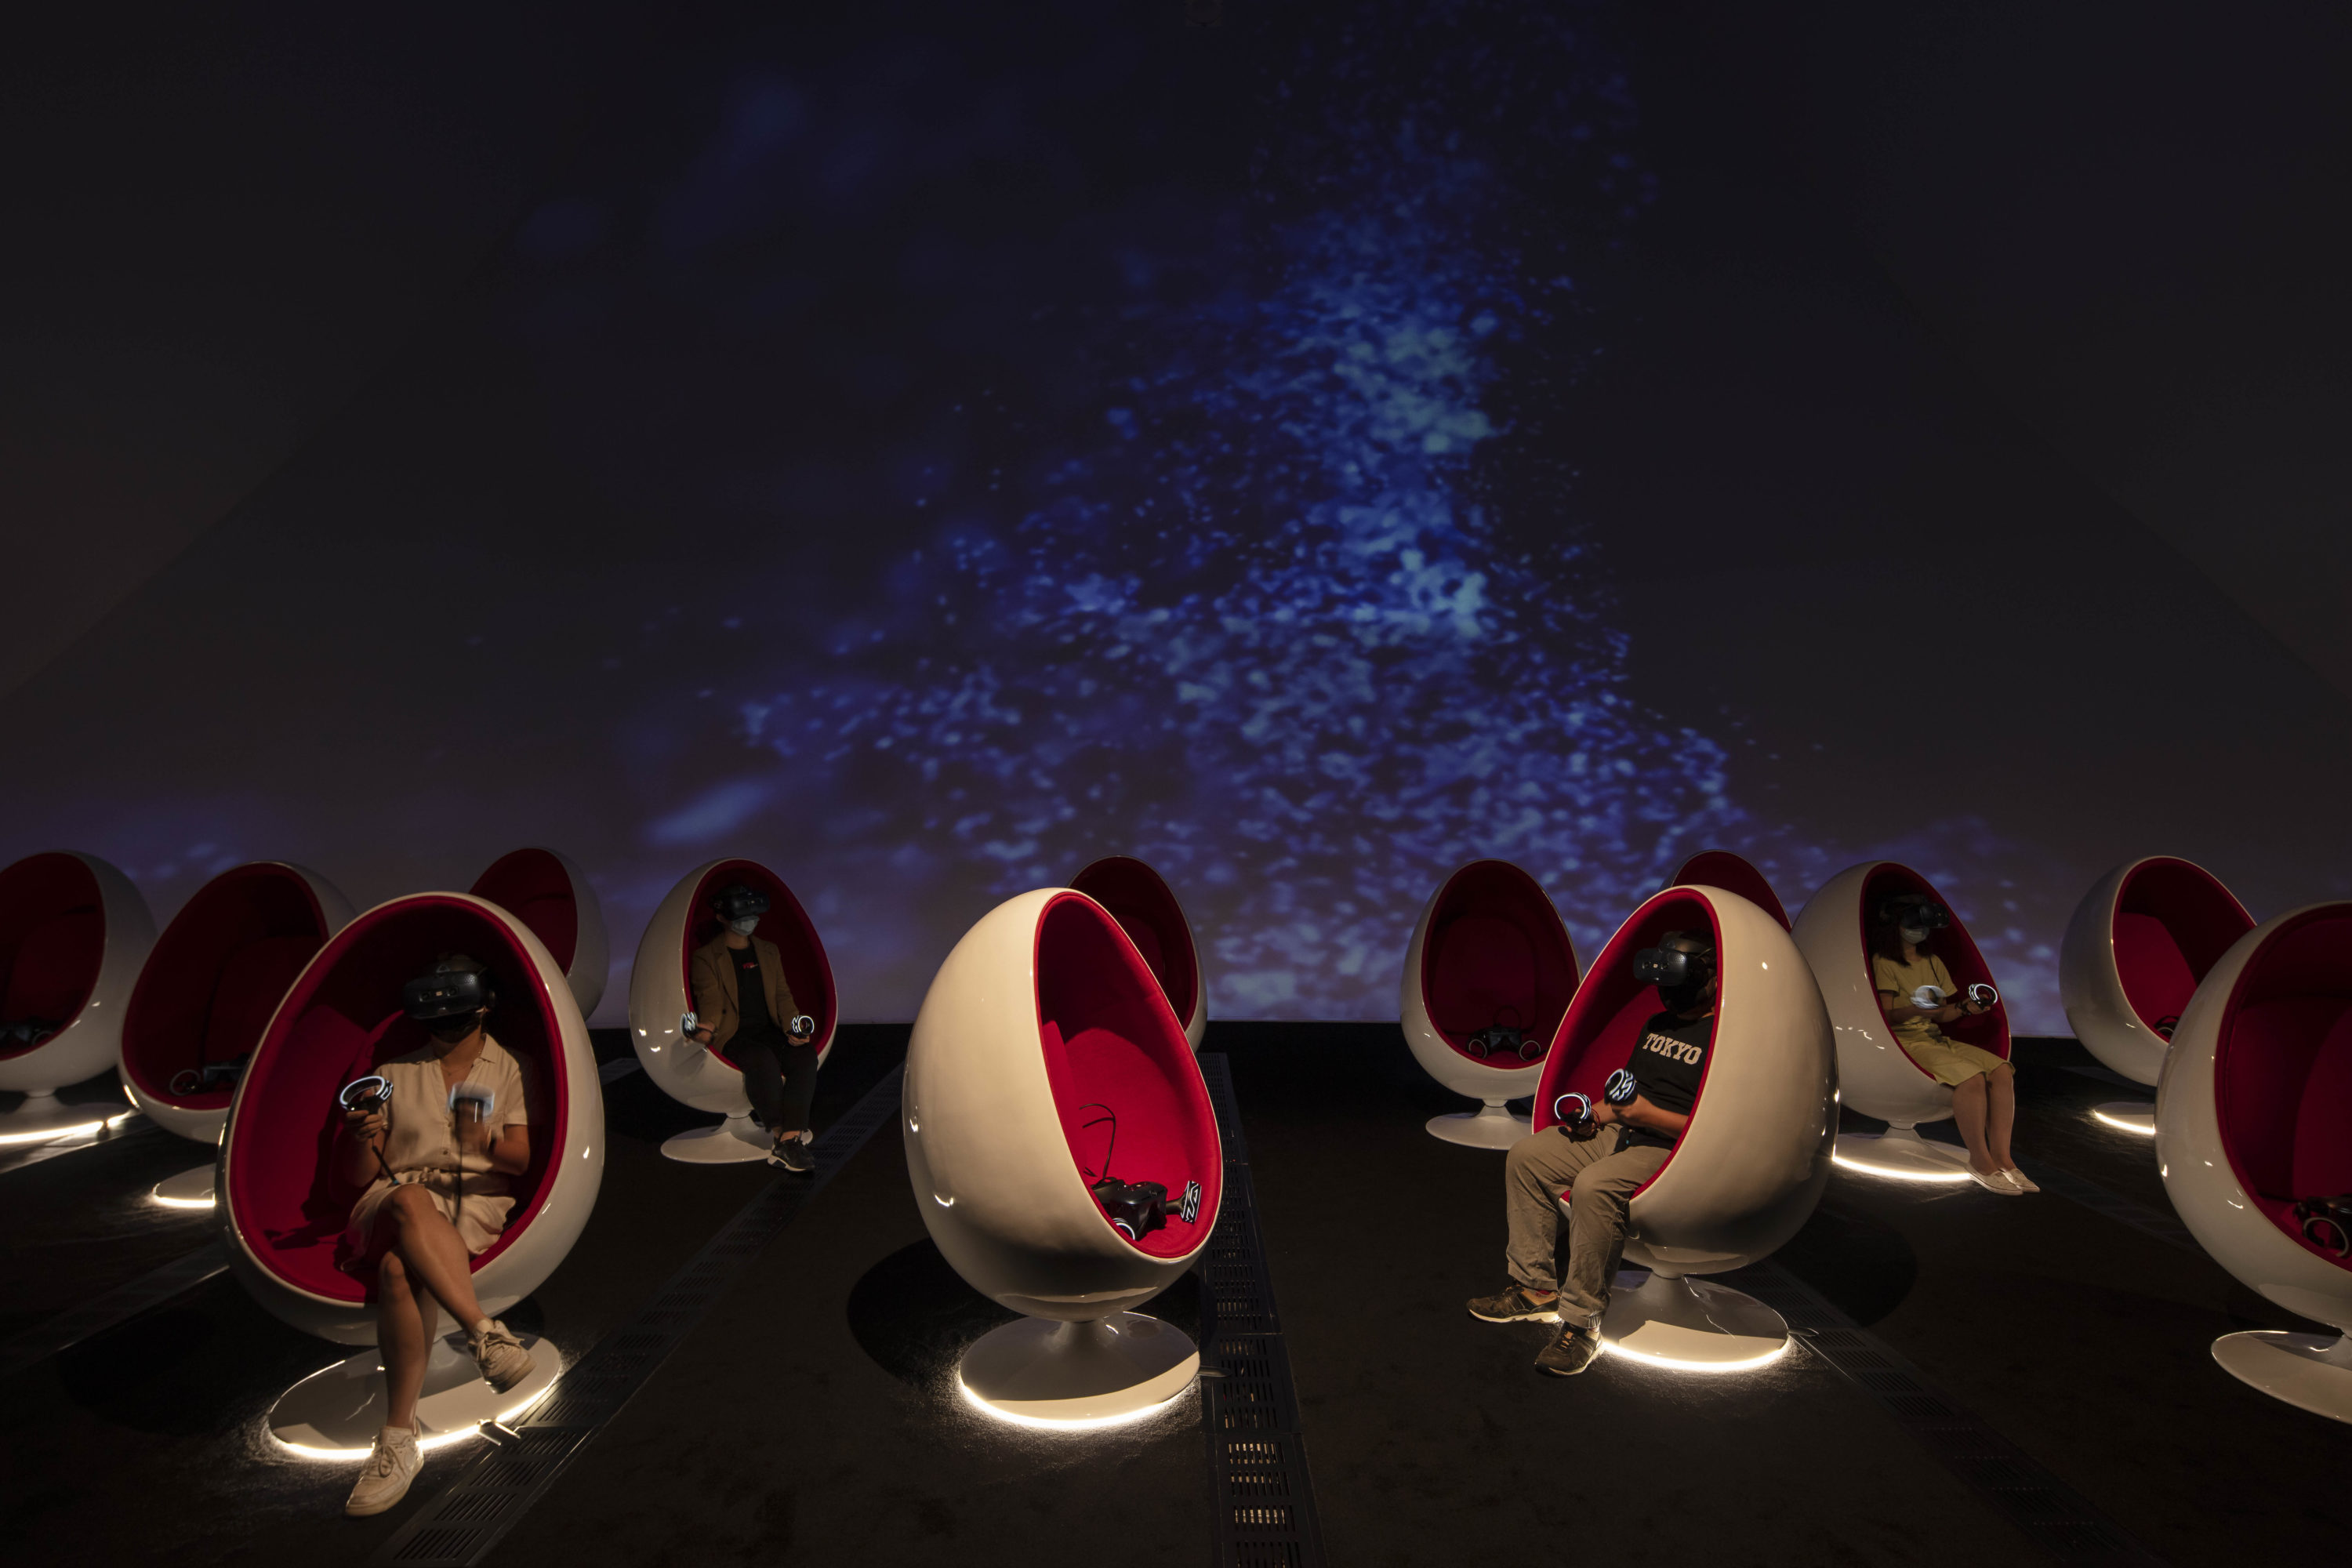 Singapore’s ArtScience Museum Launches Its First VR Gallery